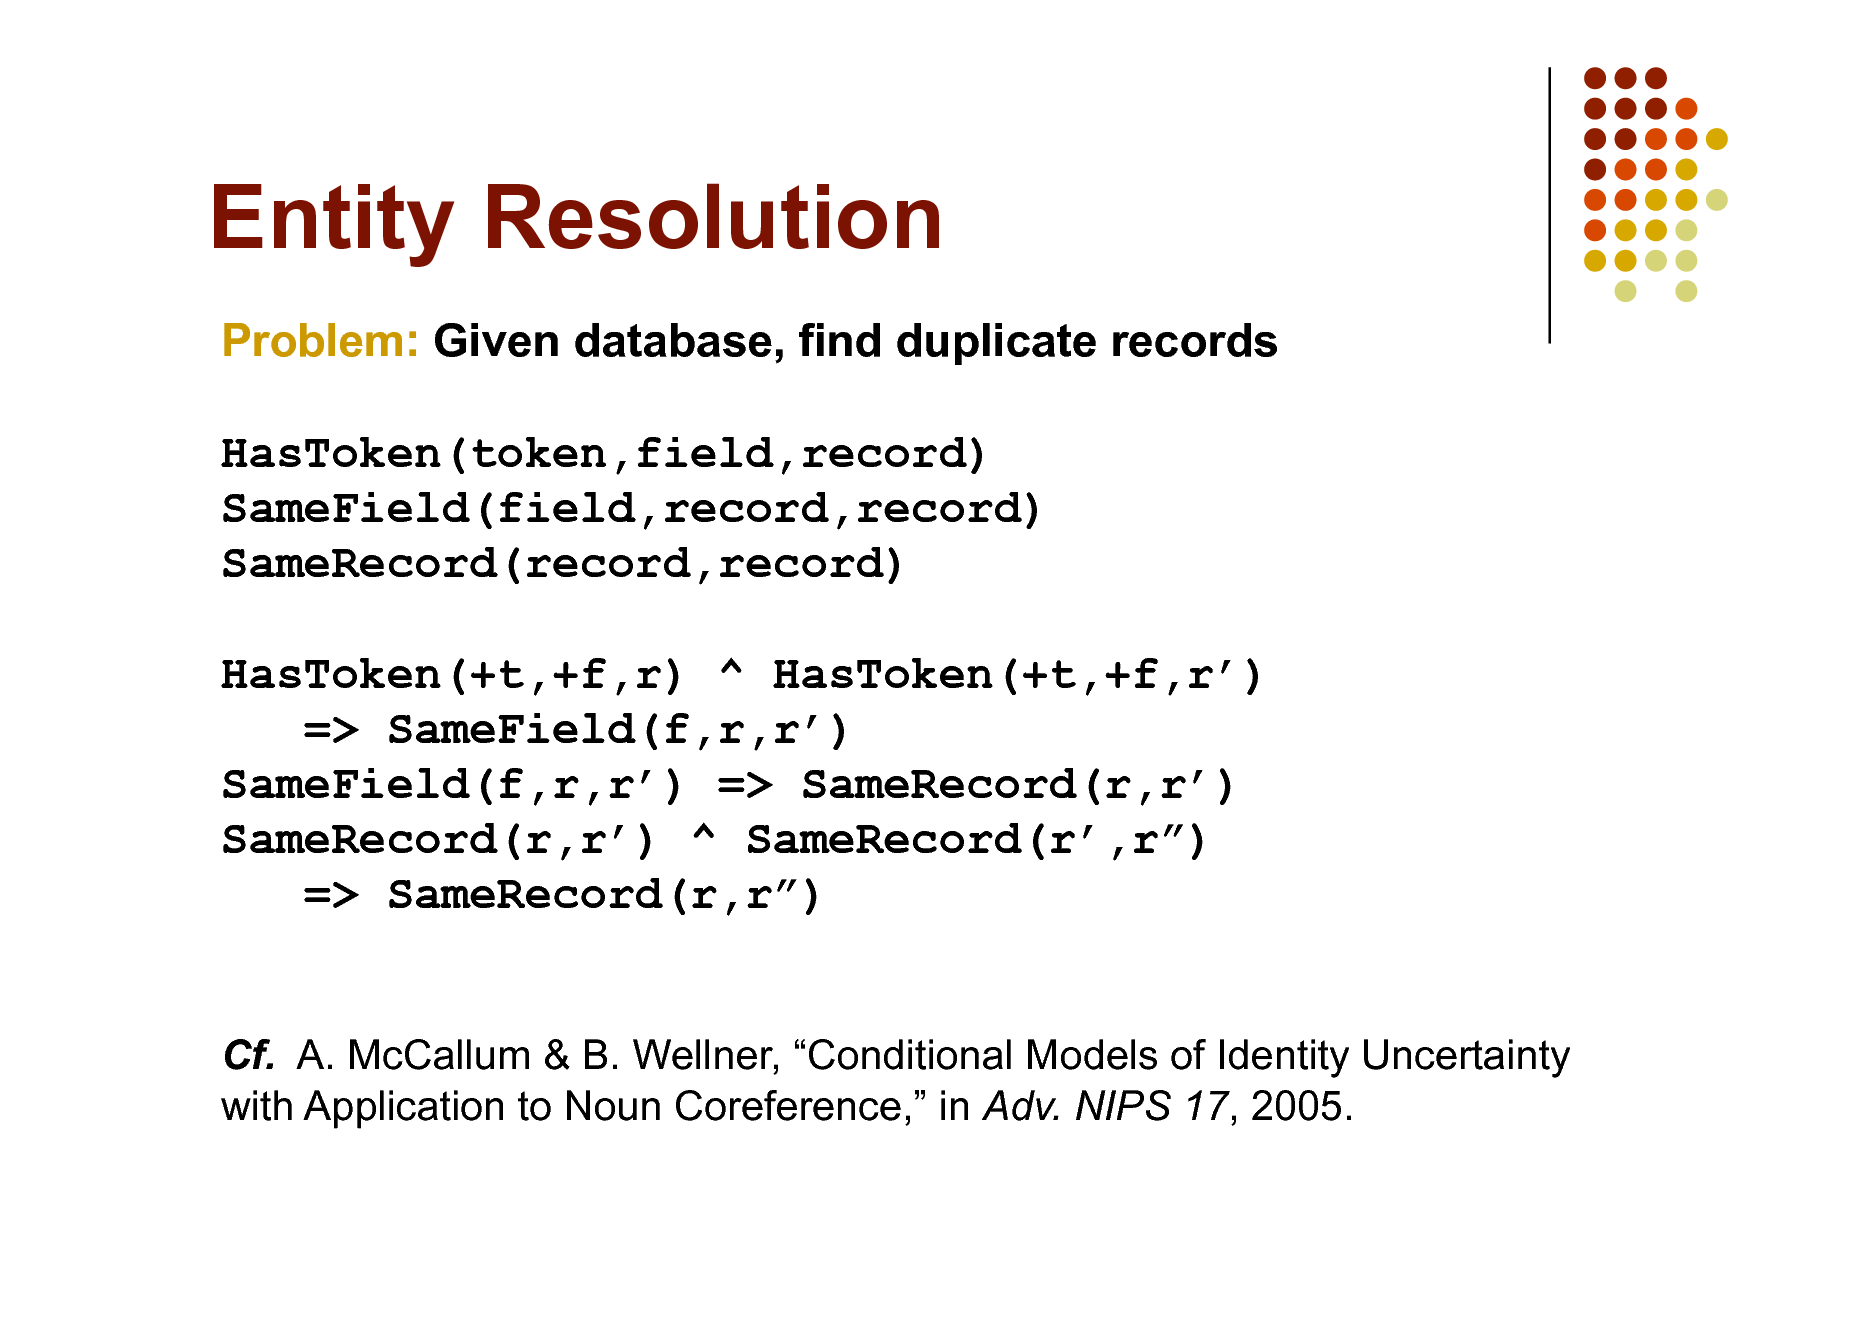 Slide: Entity Resolution
Problem: Given database, find duplicate records HasToken(token,field,record) SameField(field,record,record) SameRecord(record,record) HasToken(+t,+f,r) ^ HasToken(+t,+f,r) => SameField(f,r,r) SameField(f,r,r) => SameRecord(r,r) SameRecord(r,r) ^ SameRecord(r,r) => SameRecord(r,r)
Cf. A. McCallum & B. Wellner, Conditional Models of Identity Uncertainty with Application to Noun Coreference, in Adv. NIPS 17, 2005.

